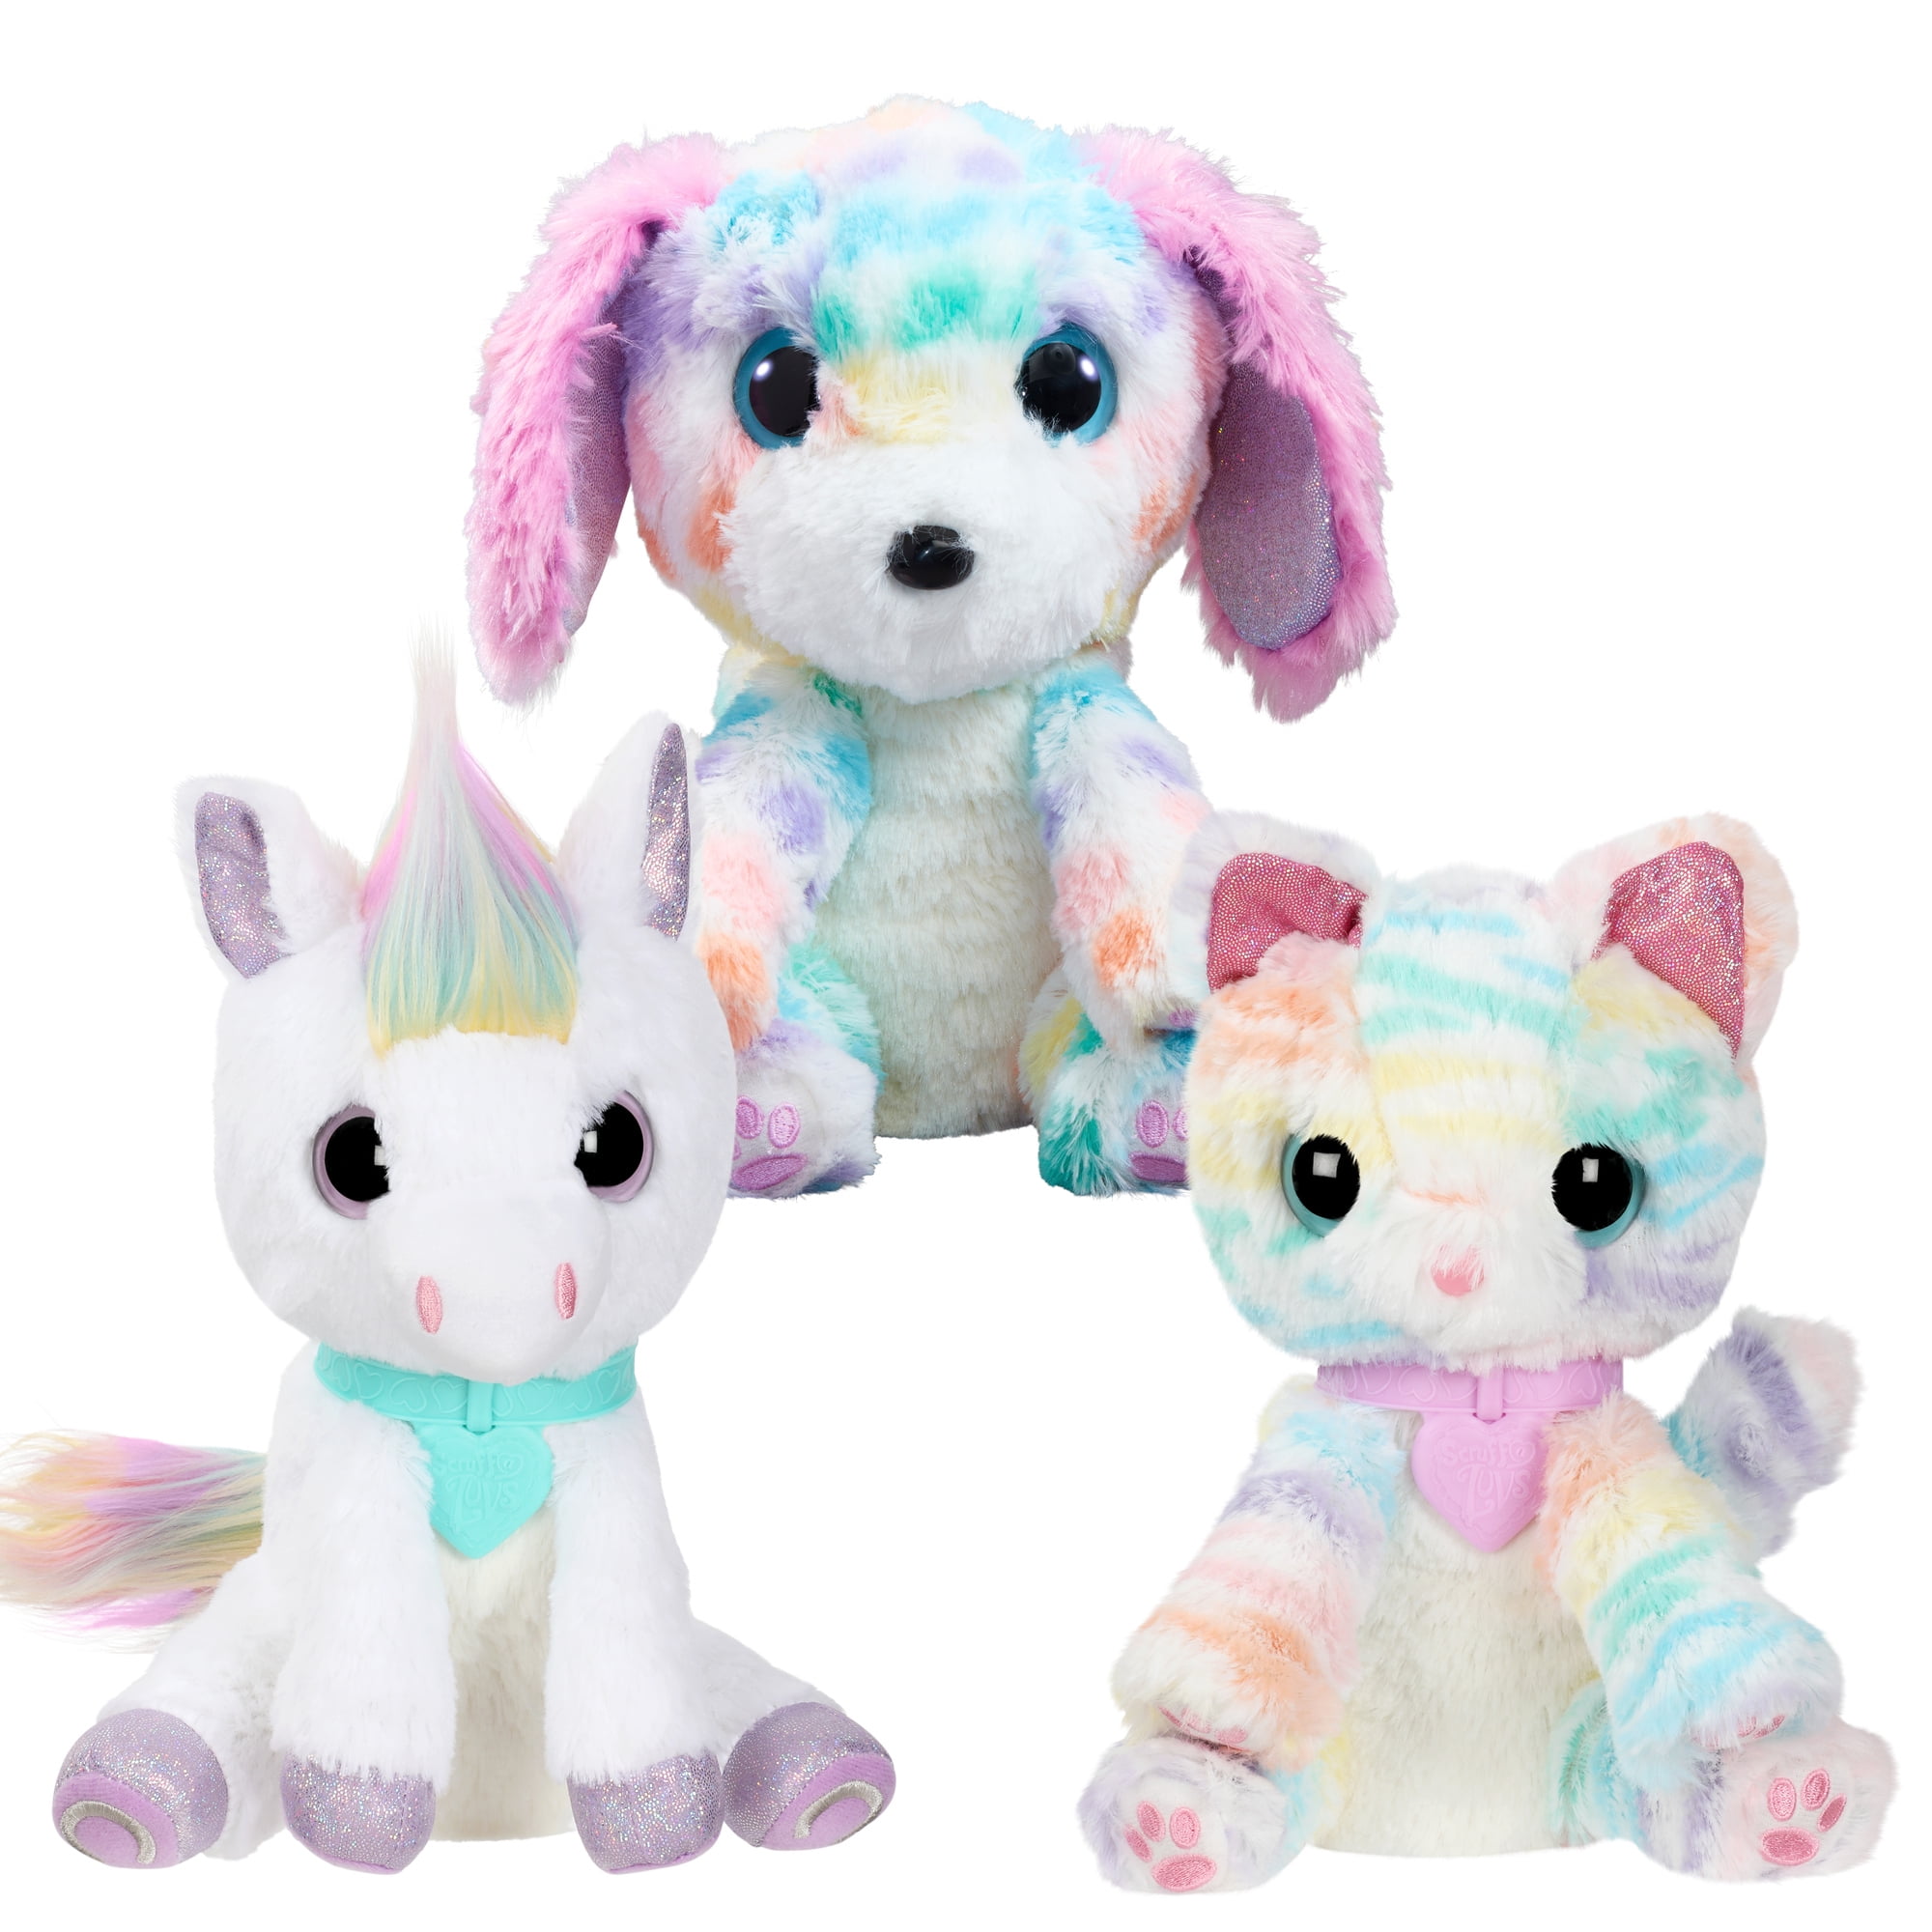 Little Live Pets, Scruff-a-Luvs Mystery Animal Reveal, Wash, Groom and Rescue a Cute Pastel Rainbow Colored Plush Pet, Colors and Styles May Vary, Toys for Kids, Ages 2+